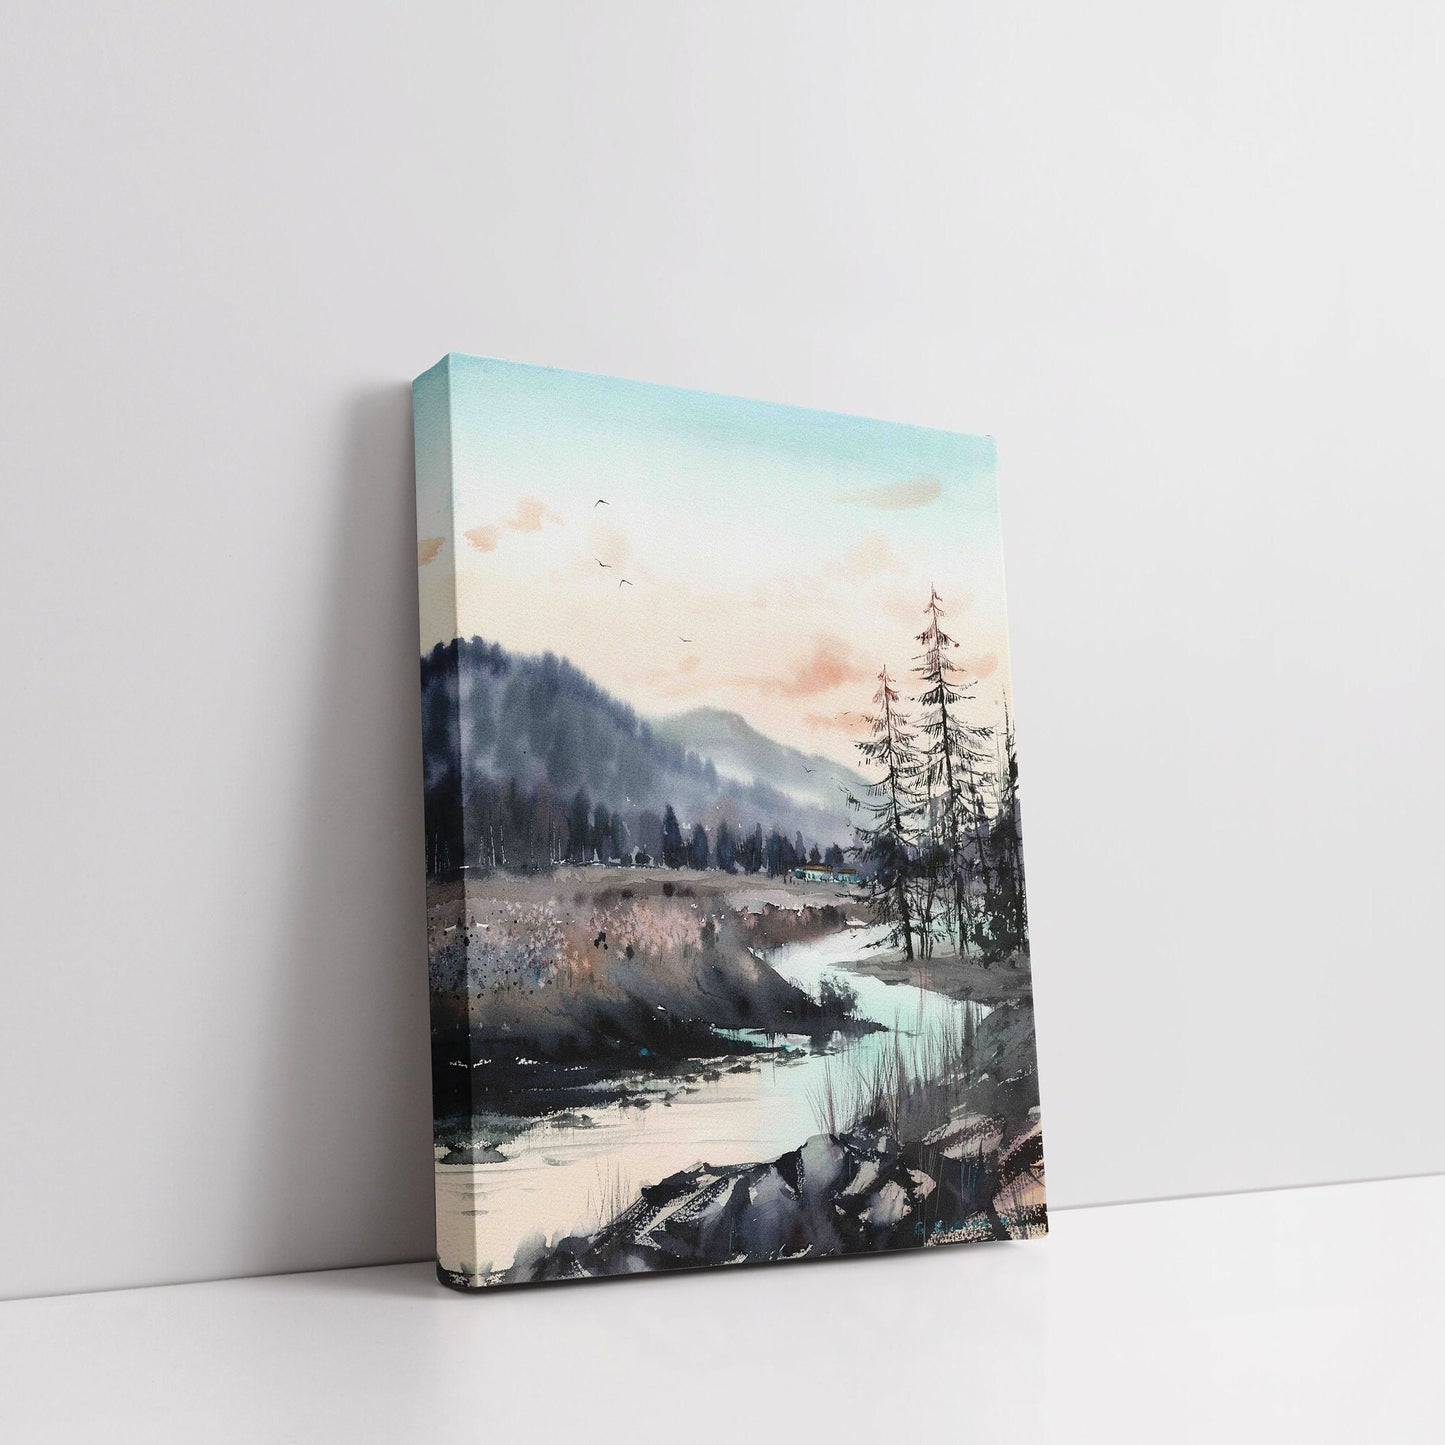 Nature Art Print, Mountain Wall Art Decor, Pine Forest Painting, Impressionist Landscape With River, Giclee Art Print